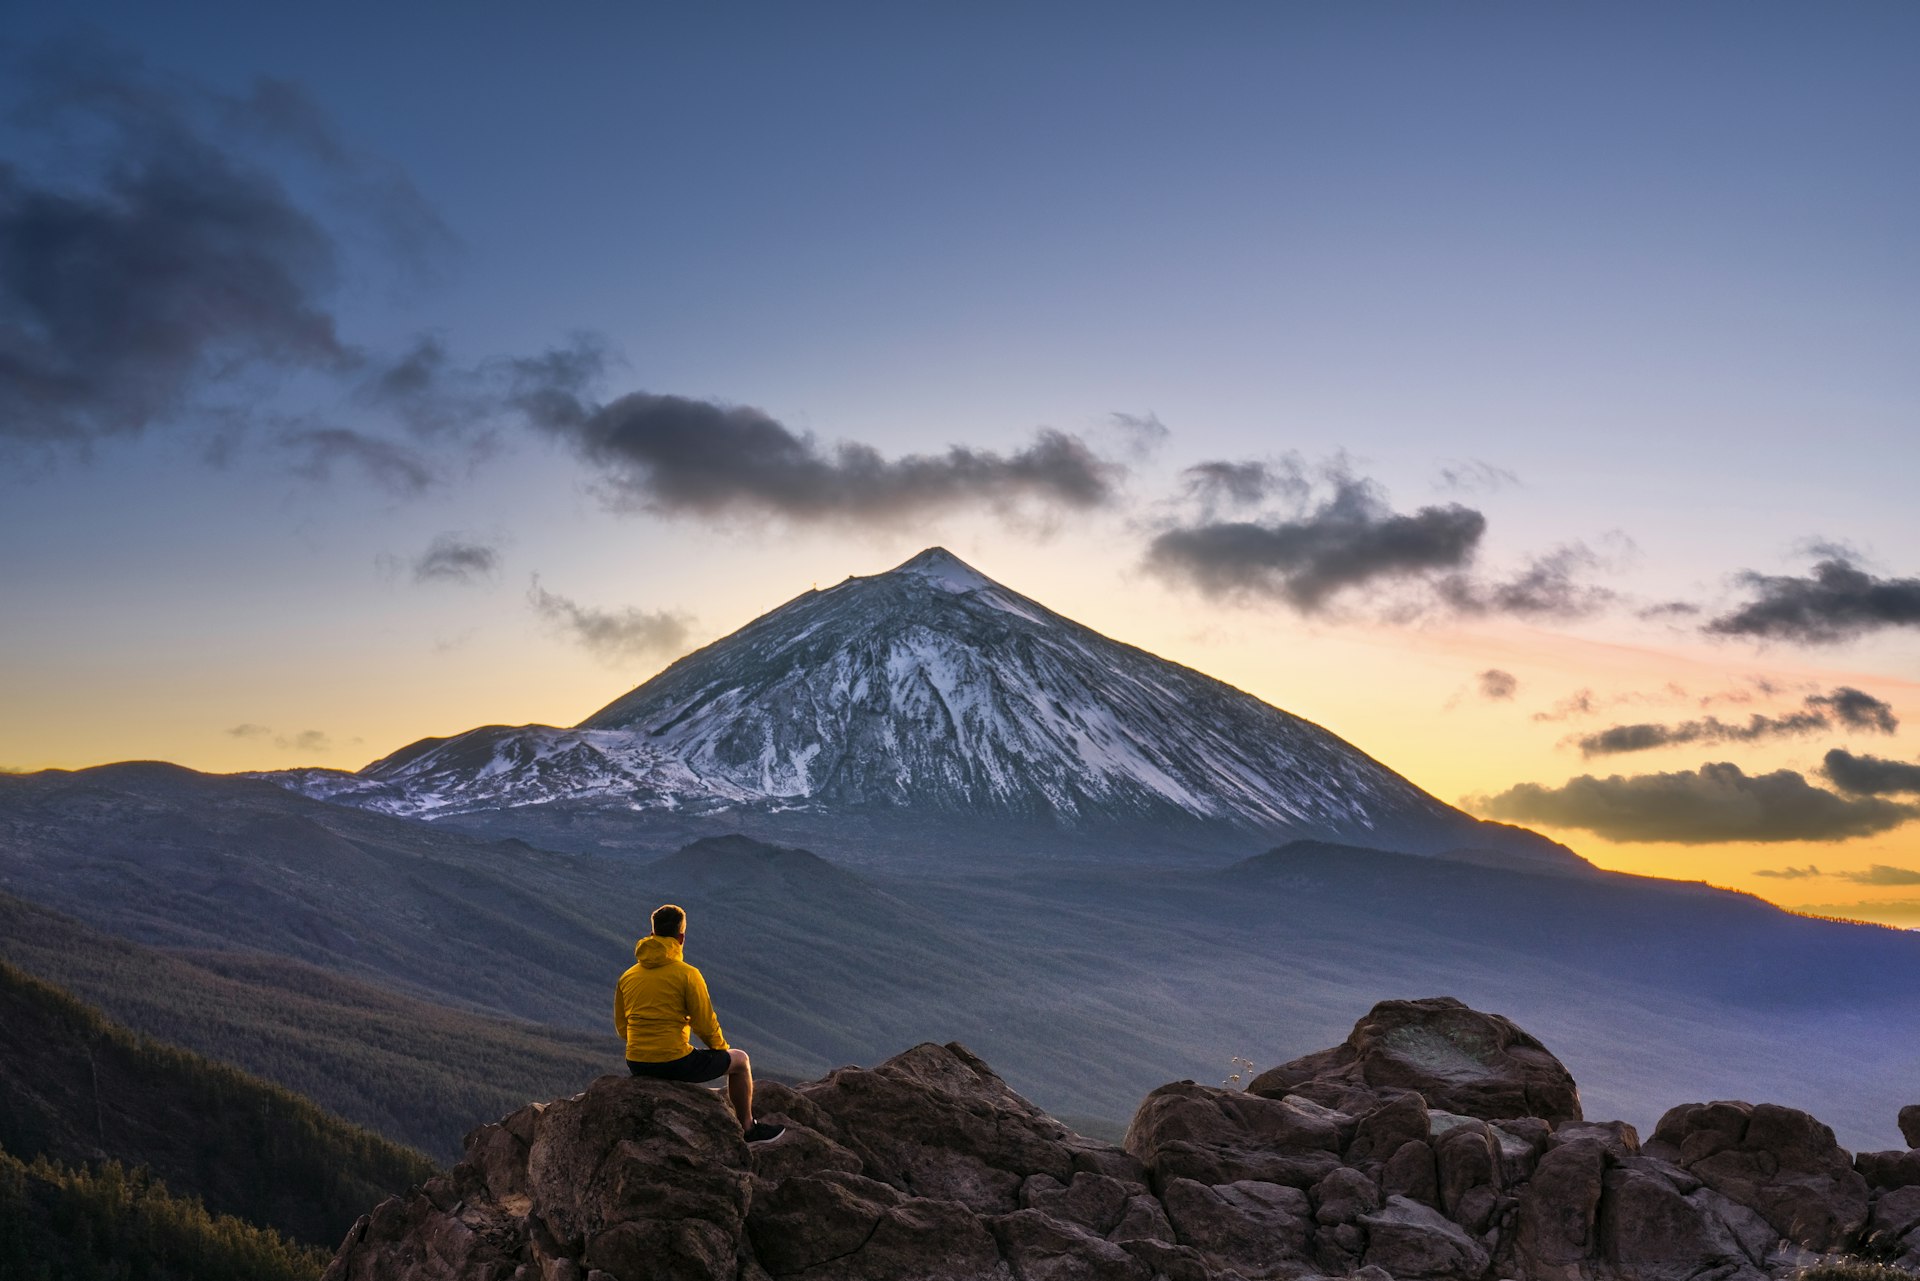 Man admiring the view of volcano Teide at dusk. Tenerife, Canary Islands, Spain